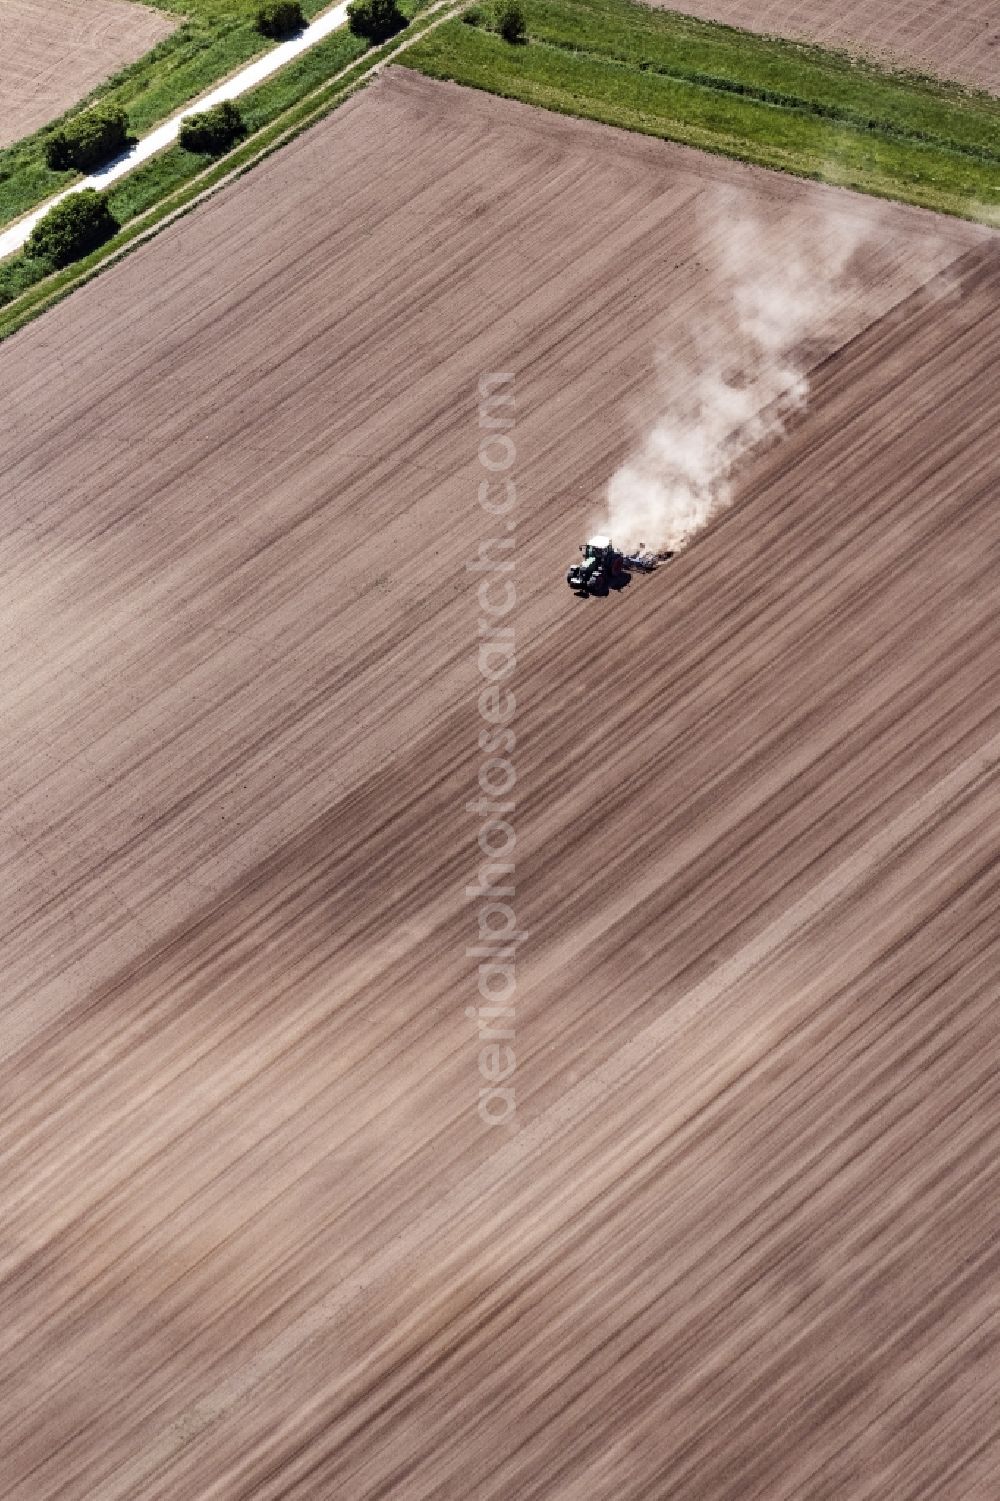 Aerial image Worms - Plowing and shifting the earth by a tractor with plow on agricultural fields in Worms in the state Rhineland-Palatinate, Germany